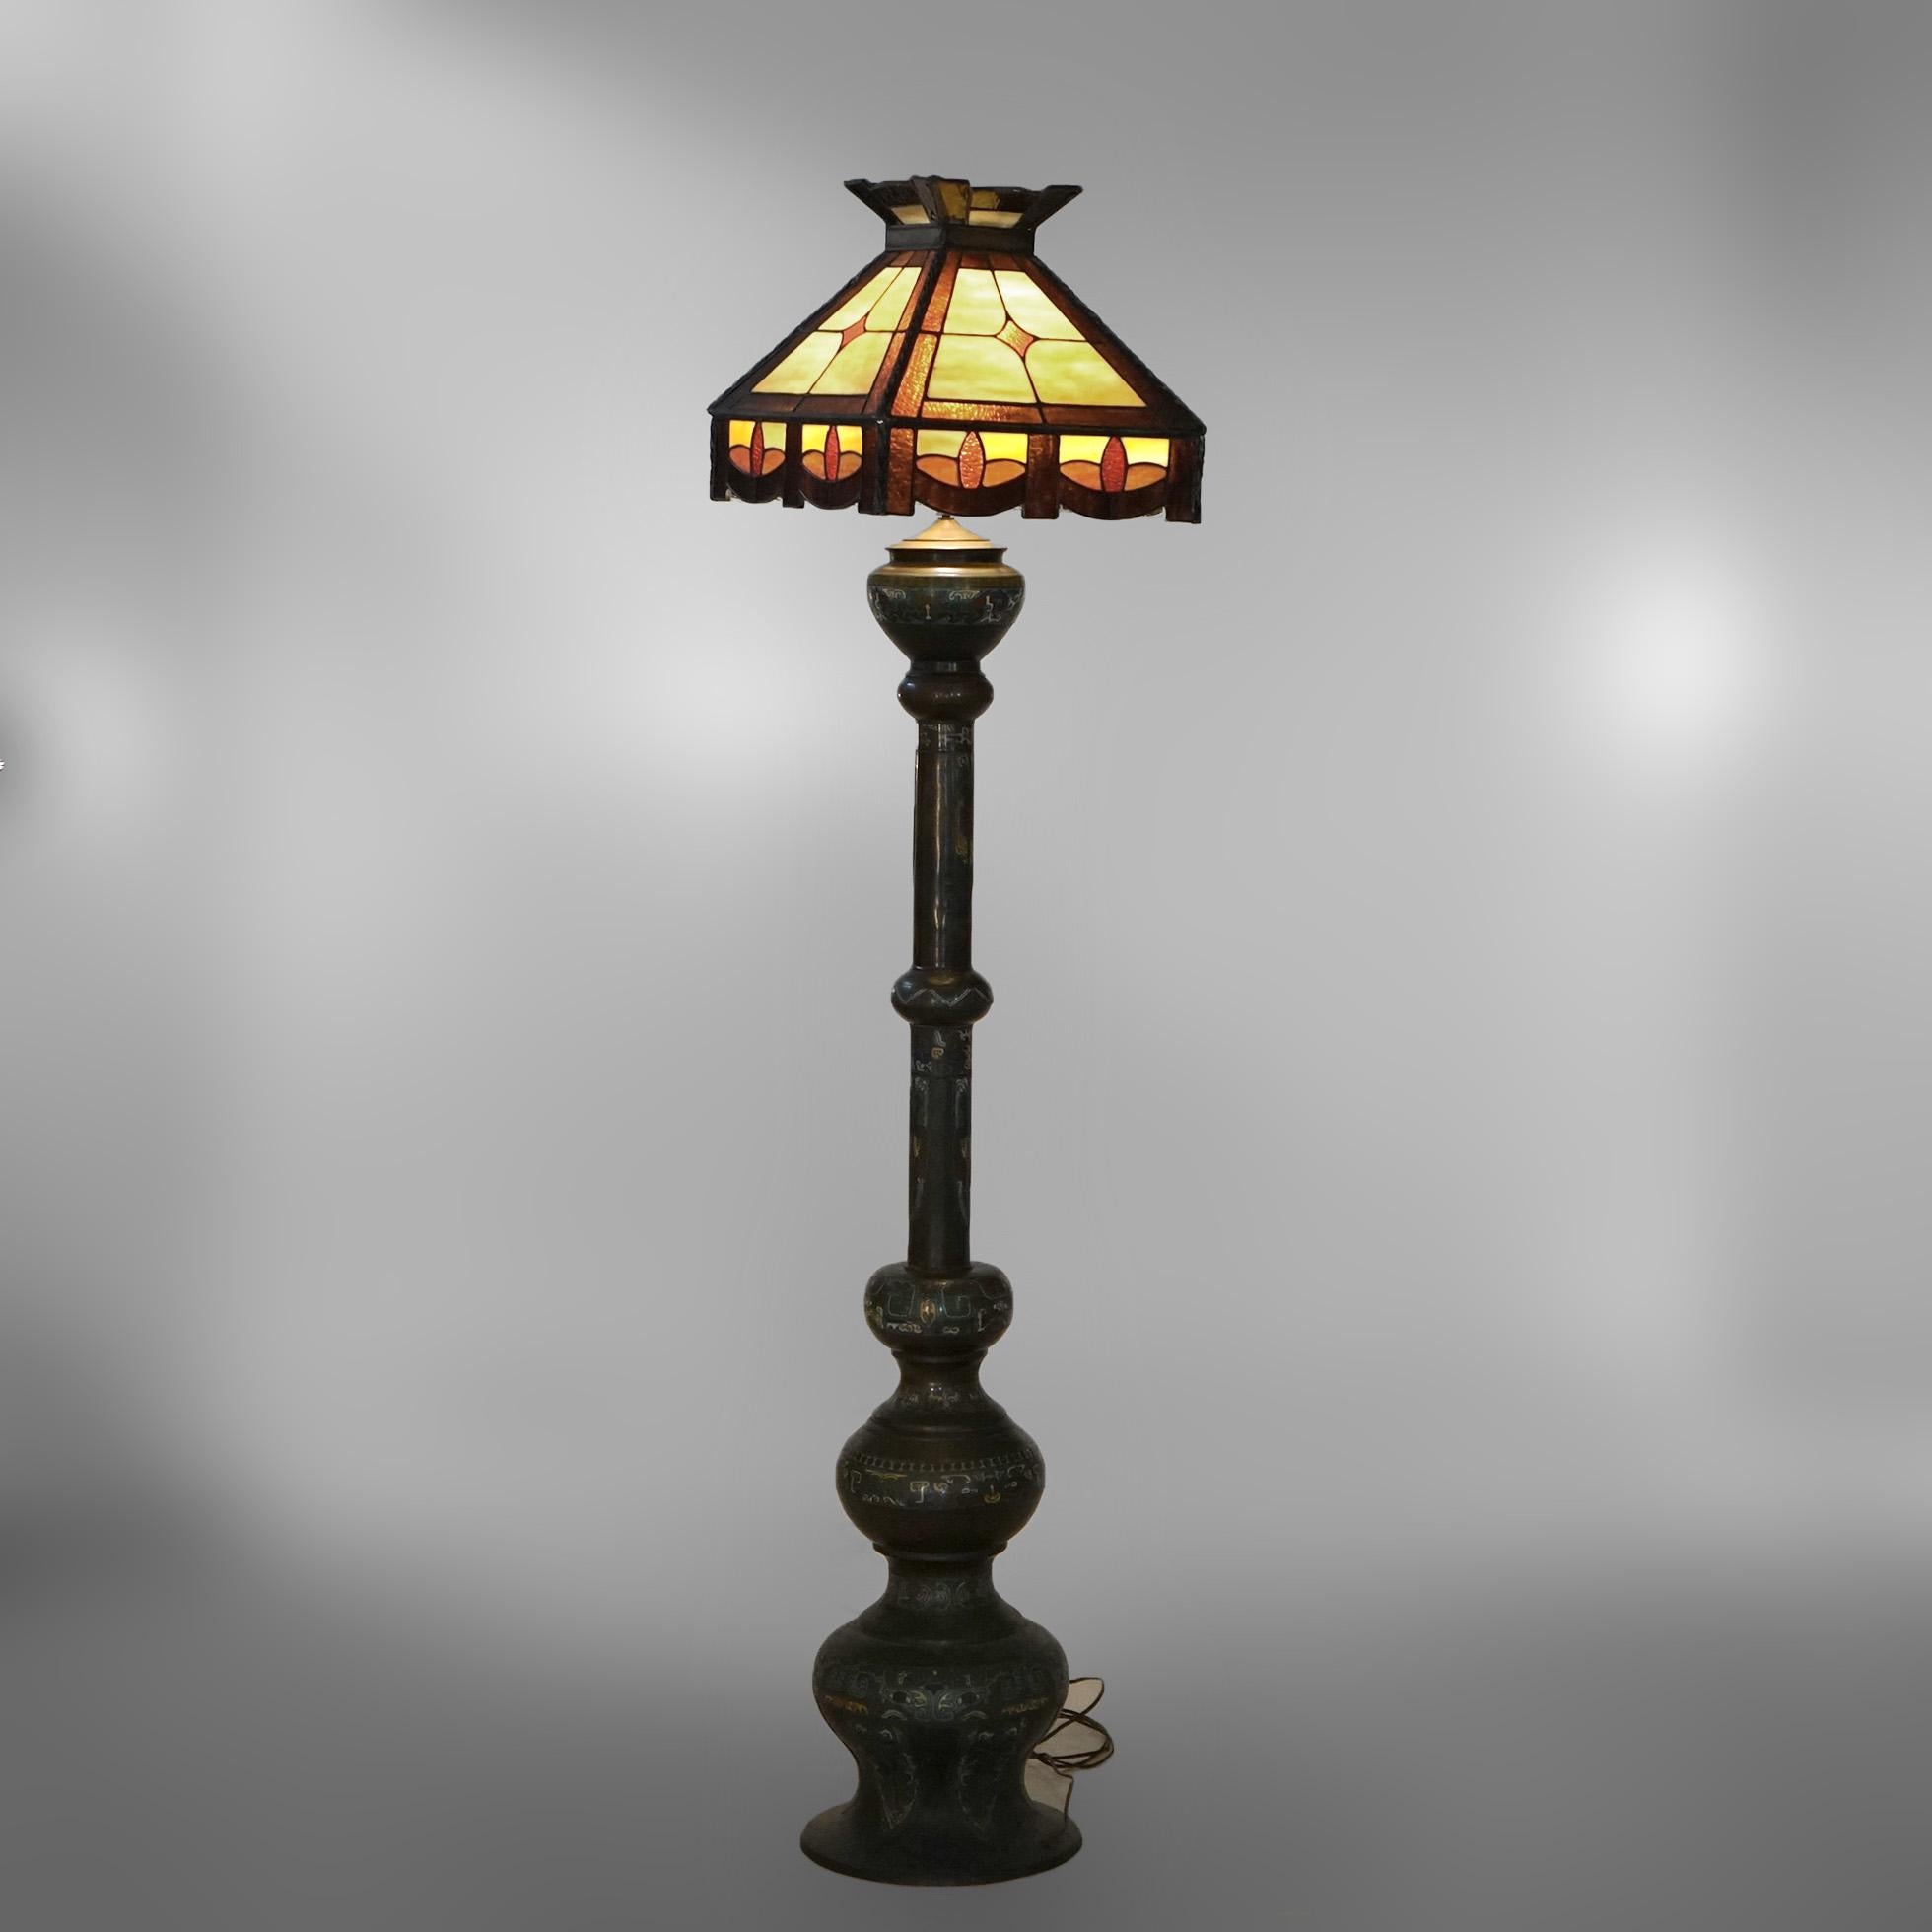 An antique floor lamp offers leaded glass shade over Chinese Champleve bronze base, electrified for US use, c1920

Measures- 75.75''H x 16.25''W x 16.25''D